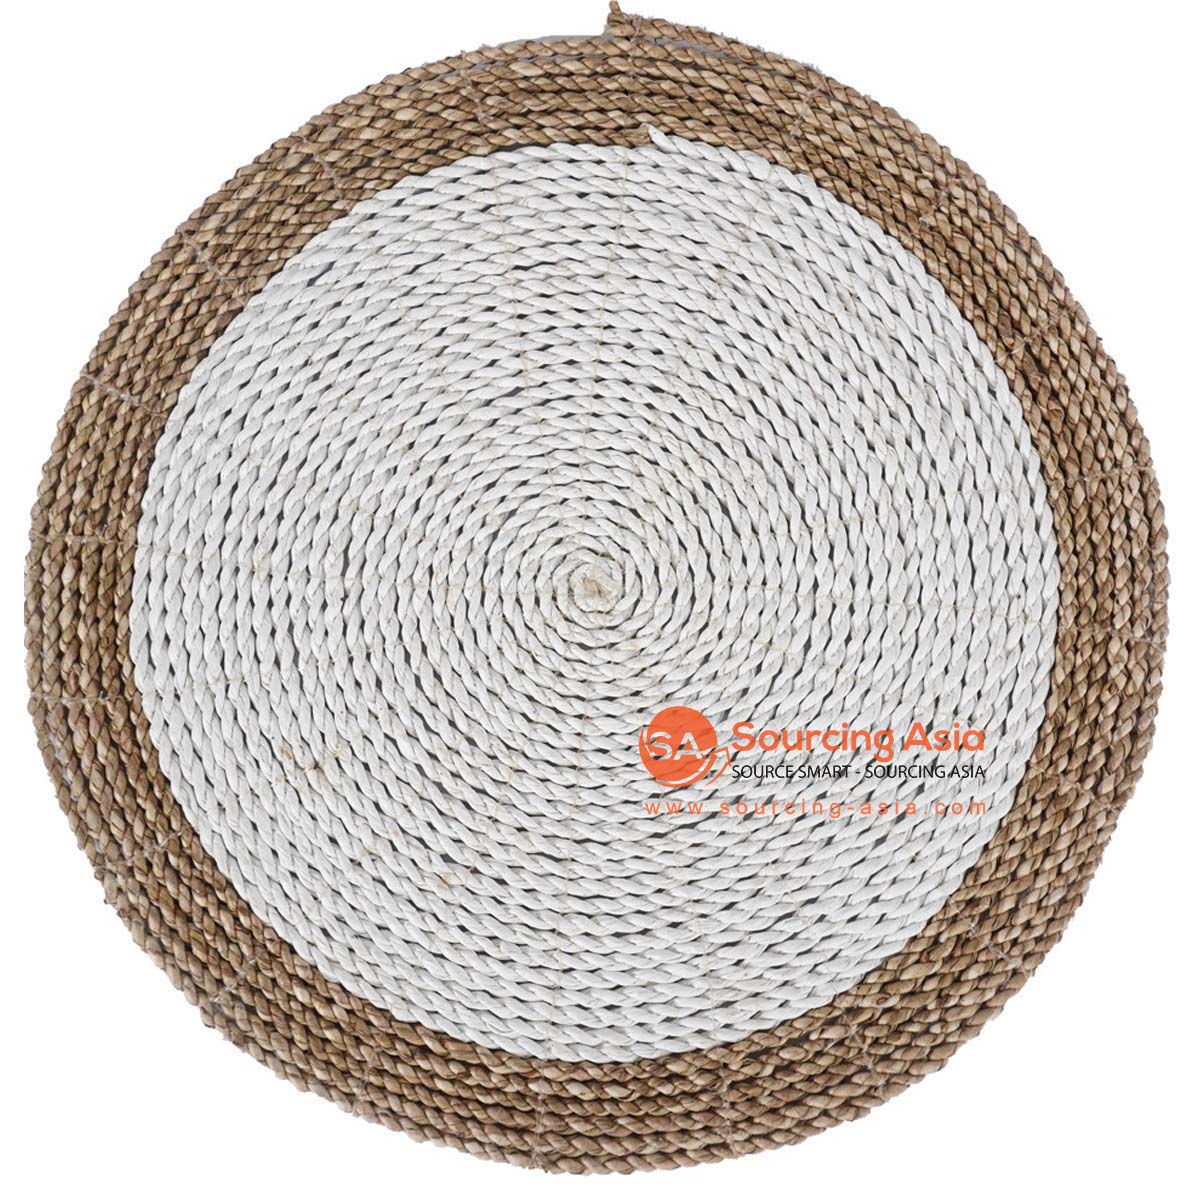 HBSC572 NATURAL AND WHITE PANDANUS ROUND PLACEMAT